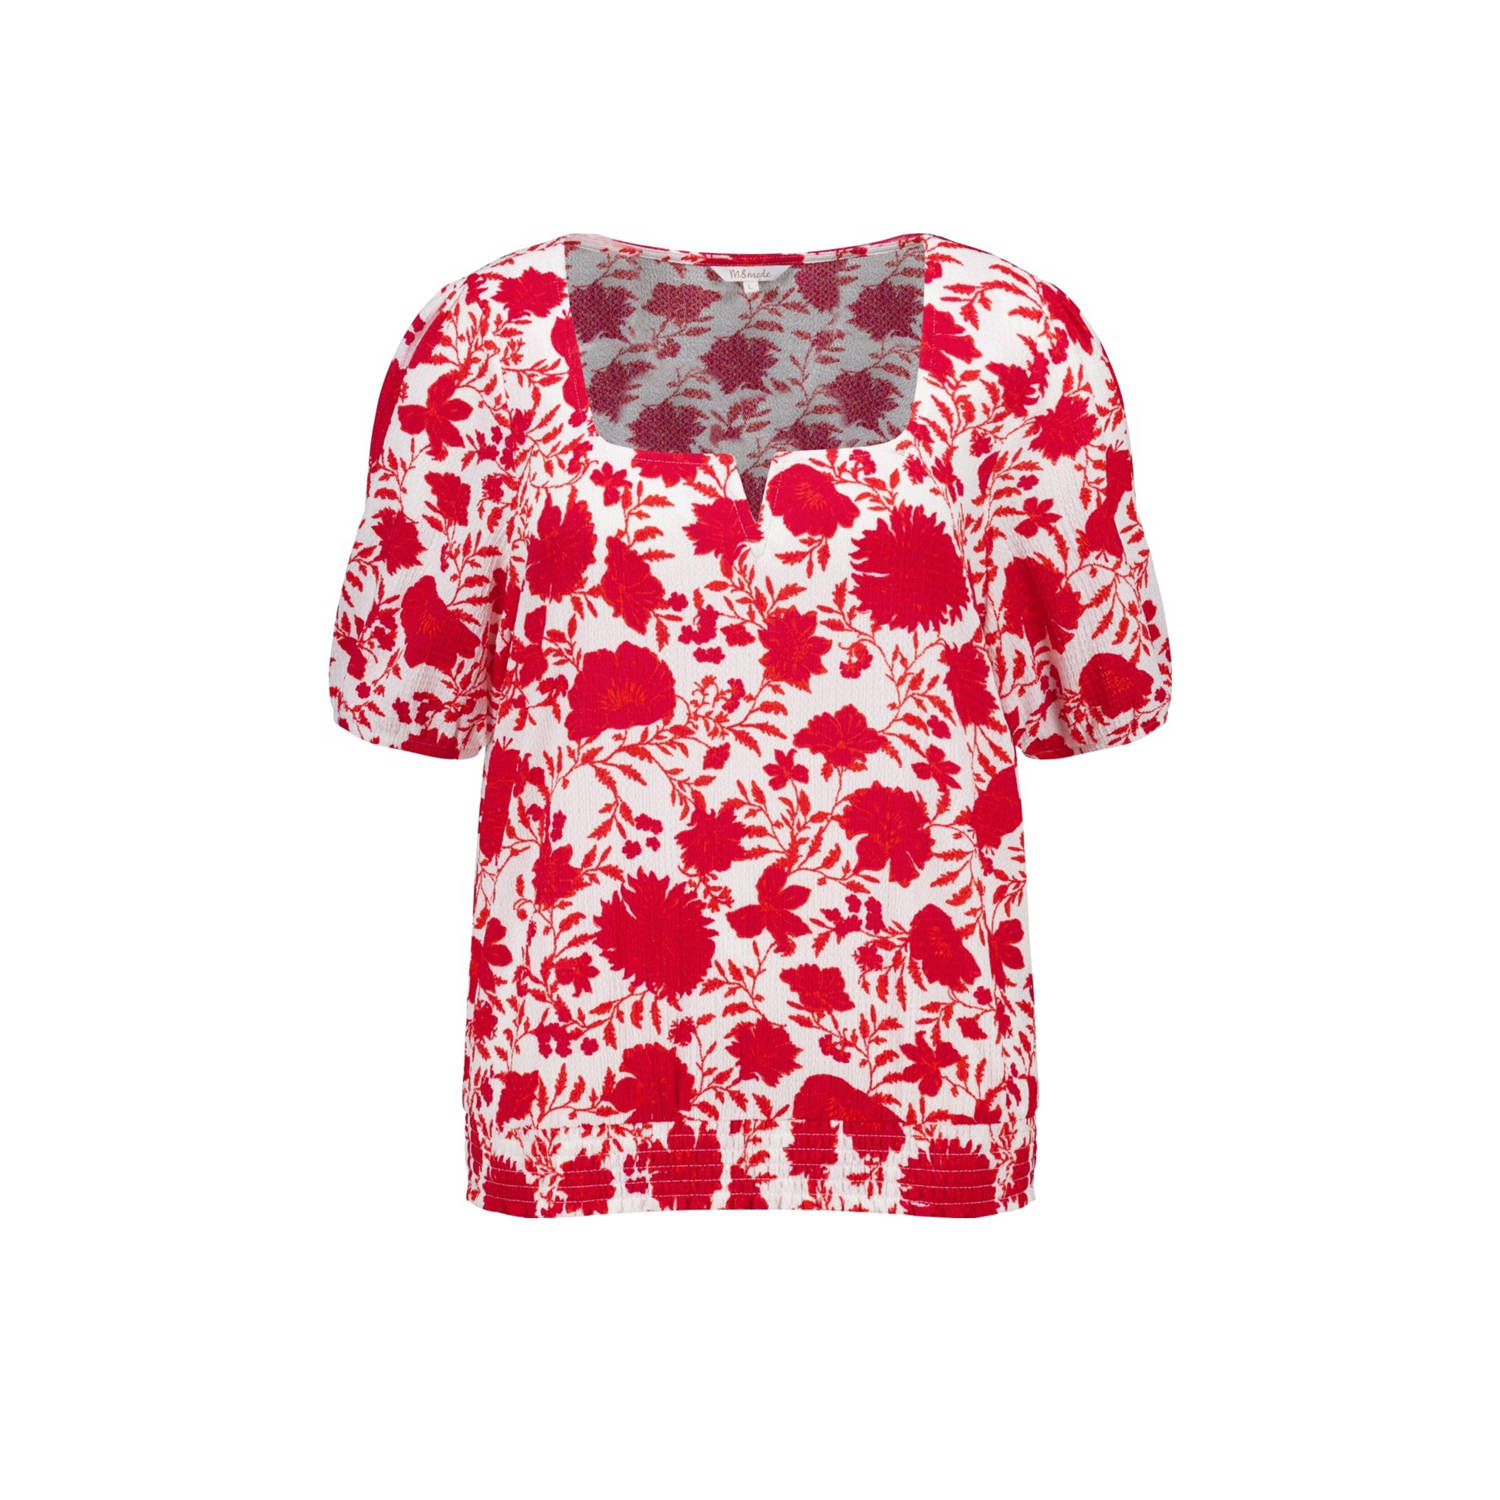 MS Mode top met all over print rood wit